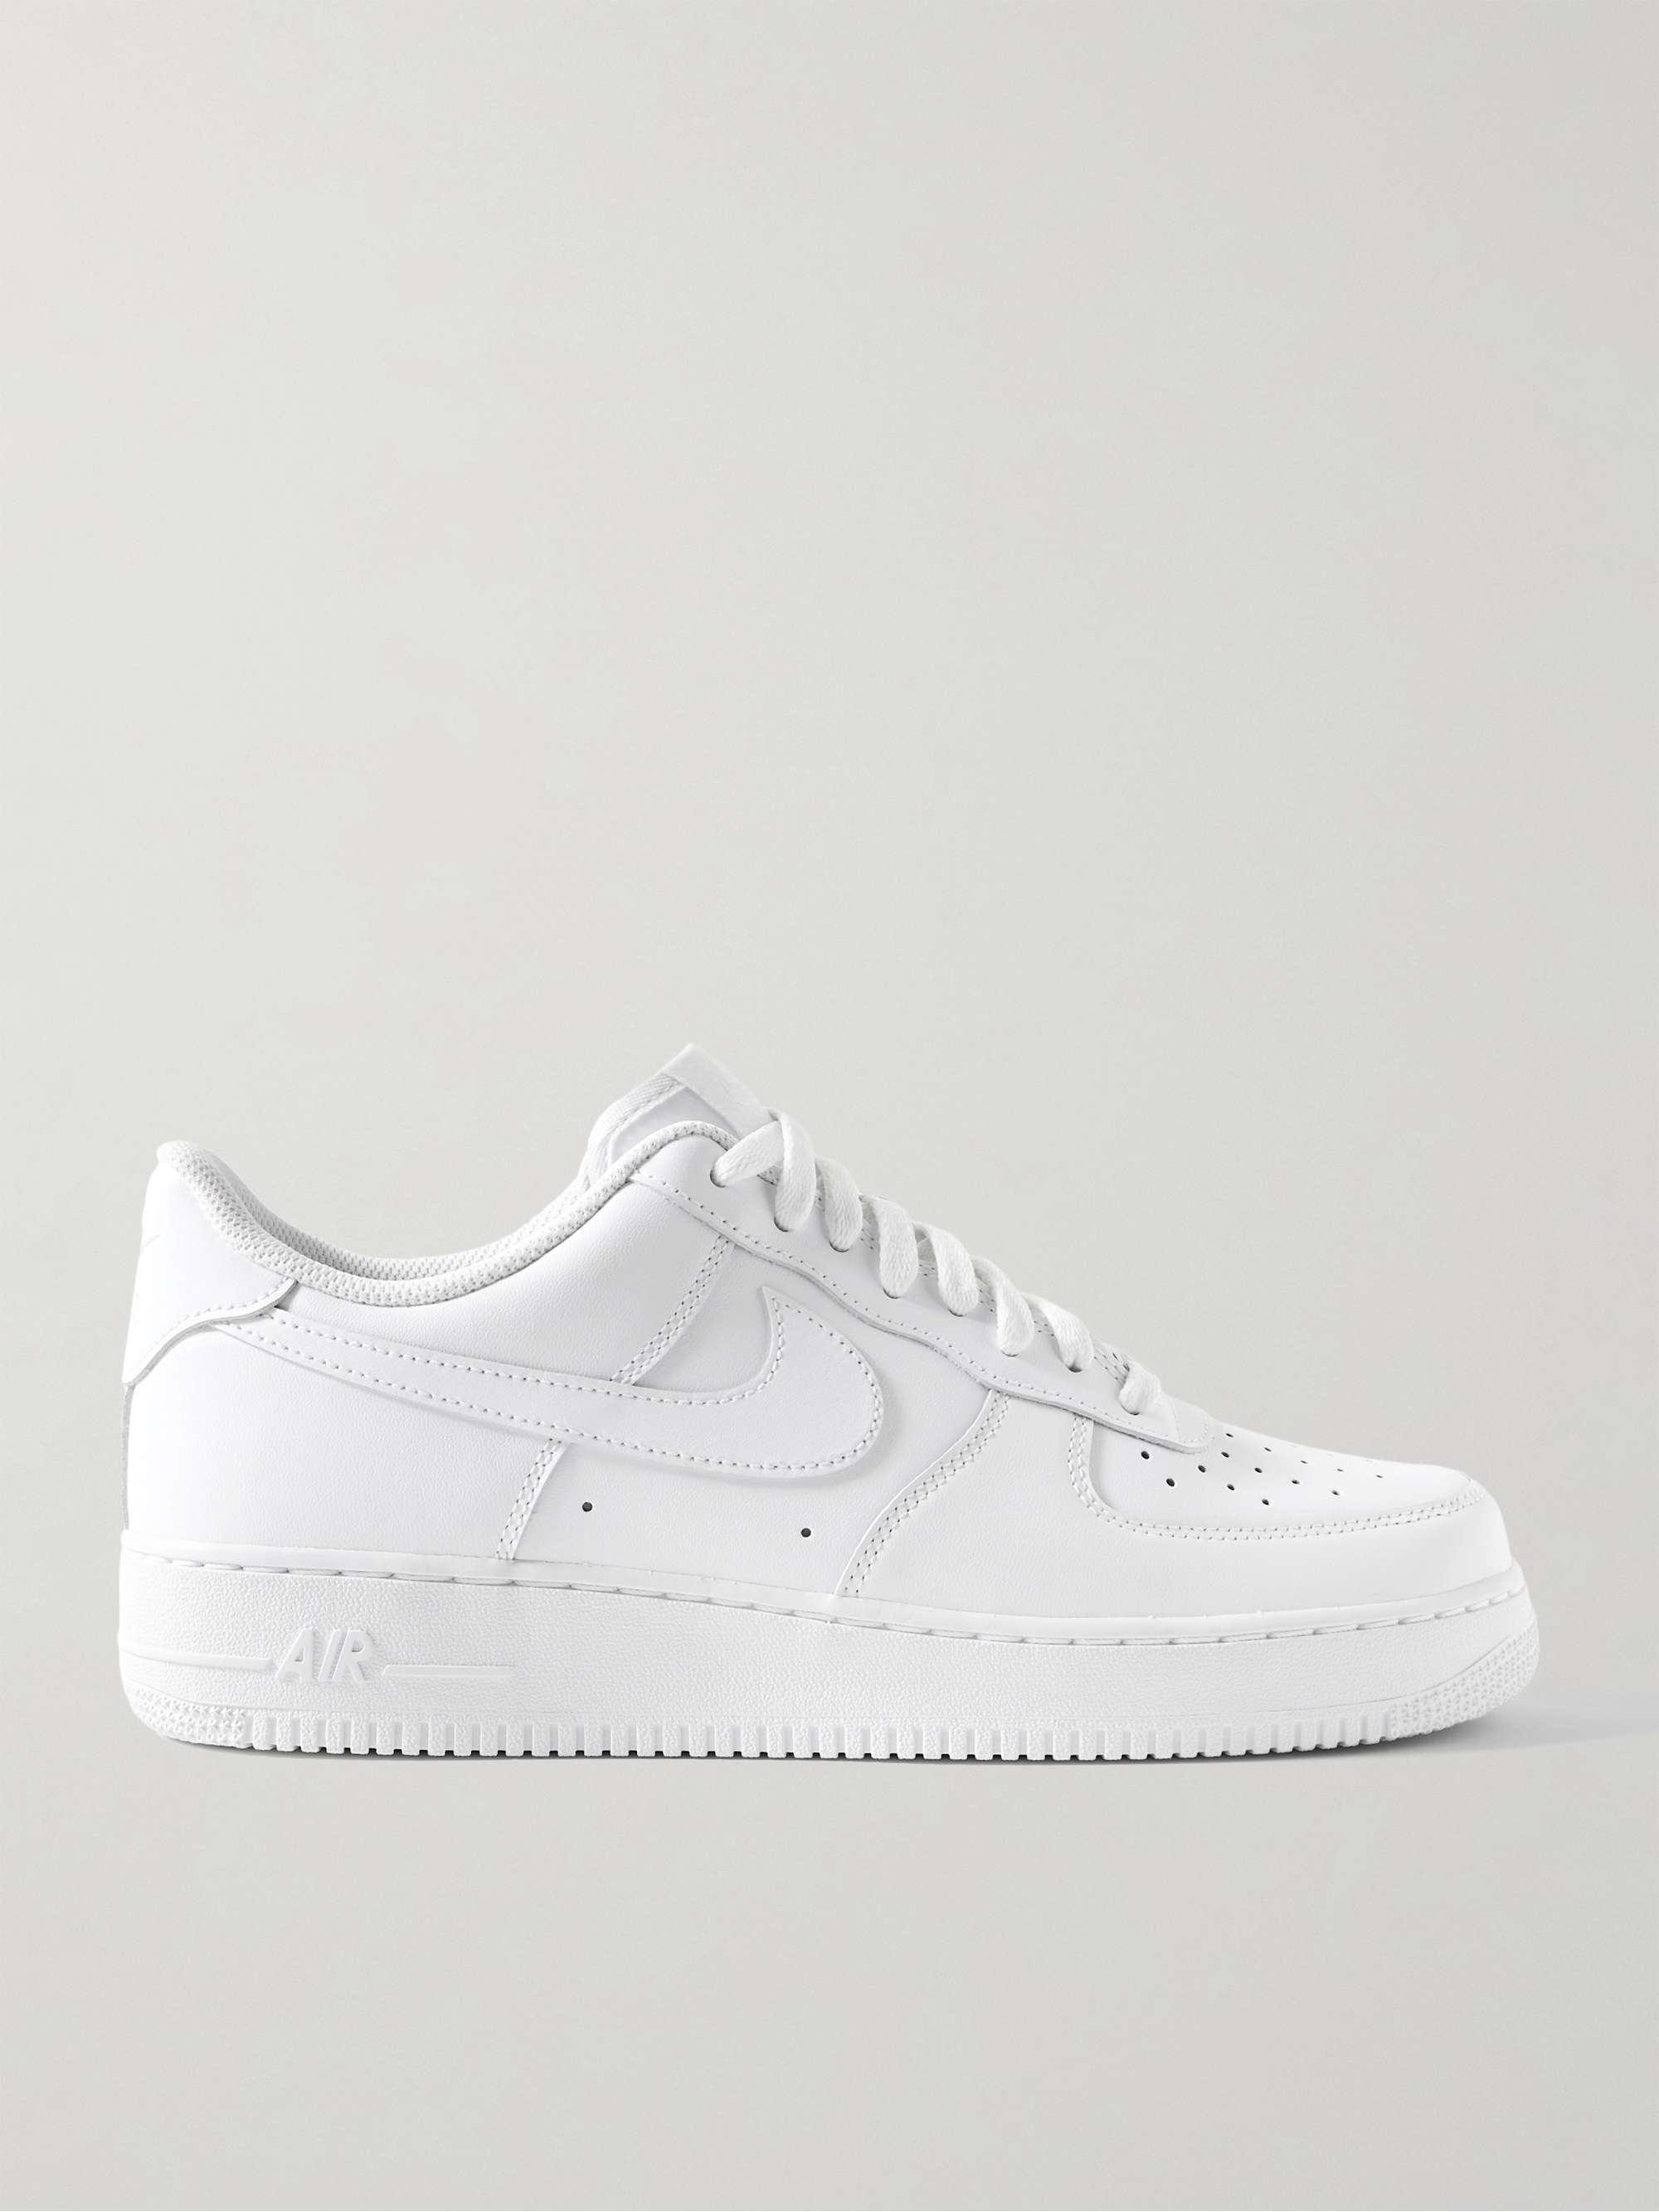 Nike Air Force 1 '07 Men's Shoes, White, 10.5